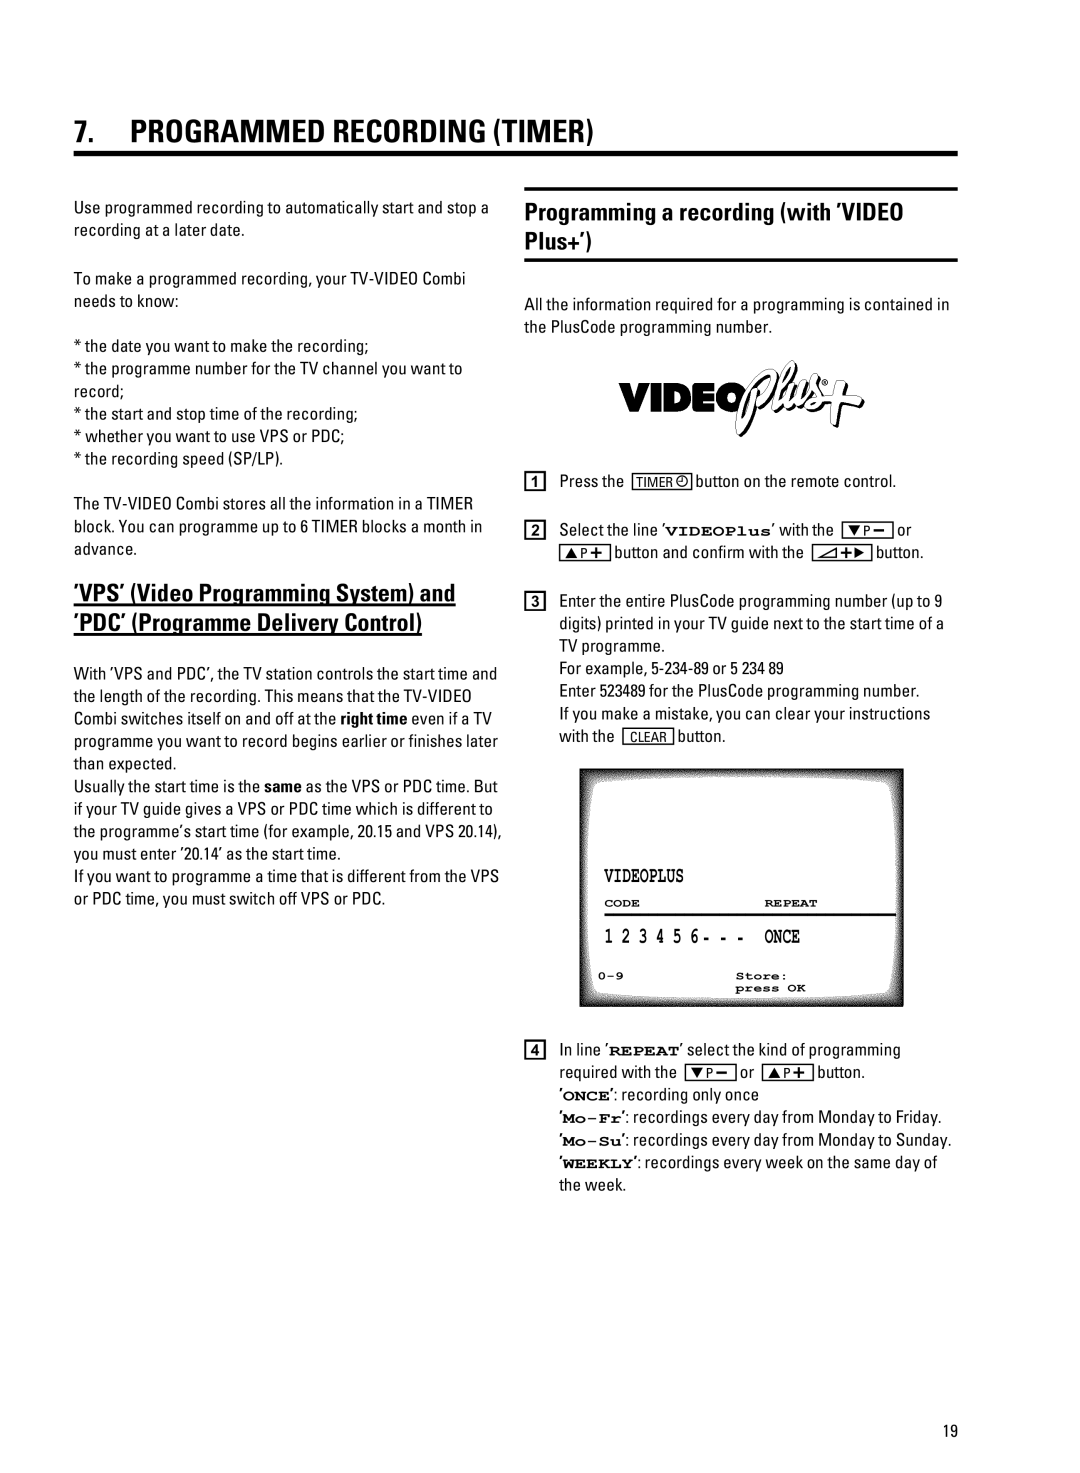 Philips 14PV334/07, 14PV330/07, 14PV335/07 manual Programmed Recording Timer, Programming a recording with ’VIDEO Plus+’ 